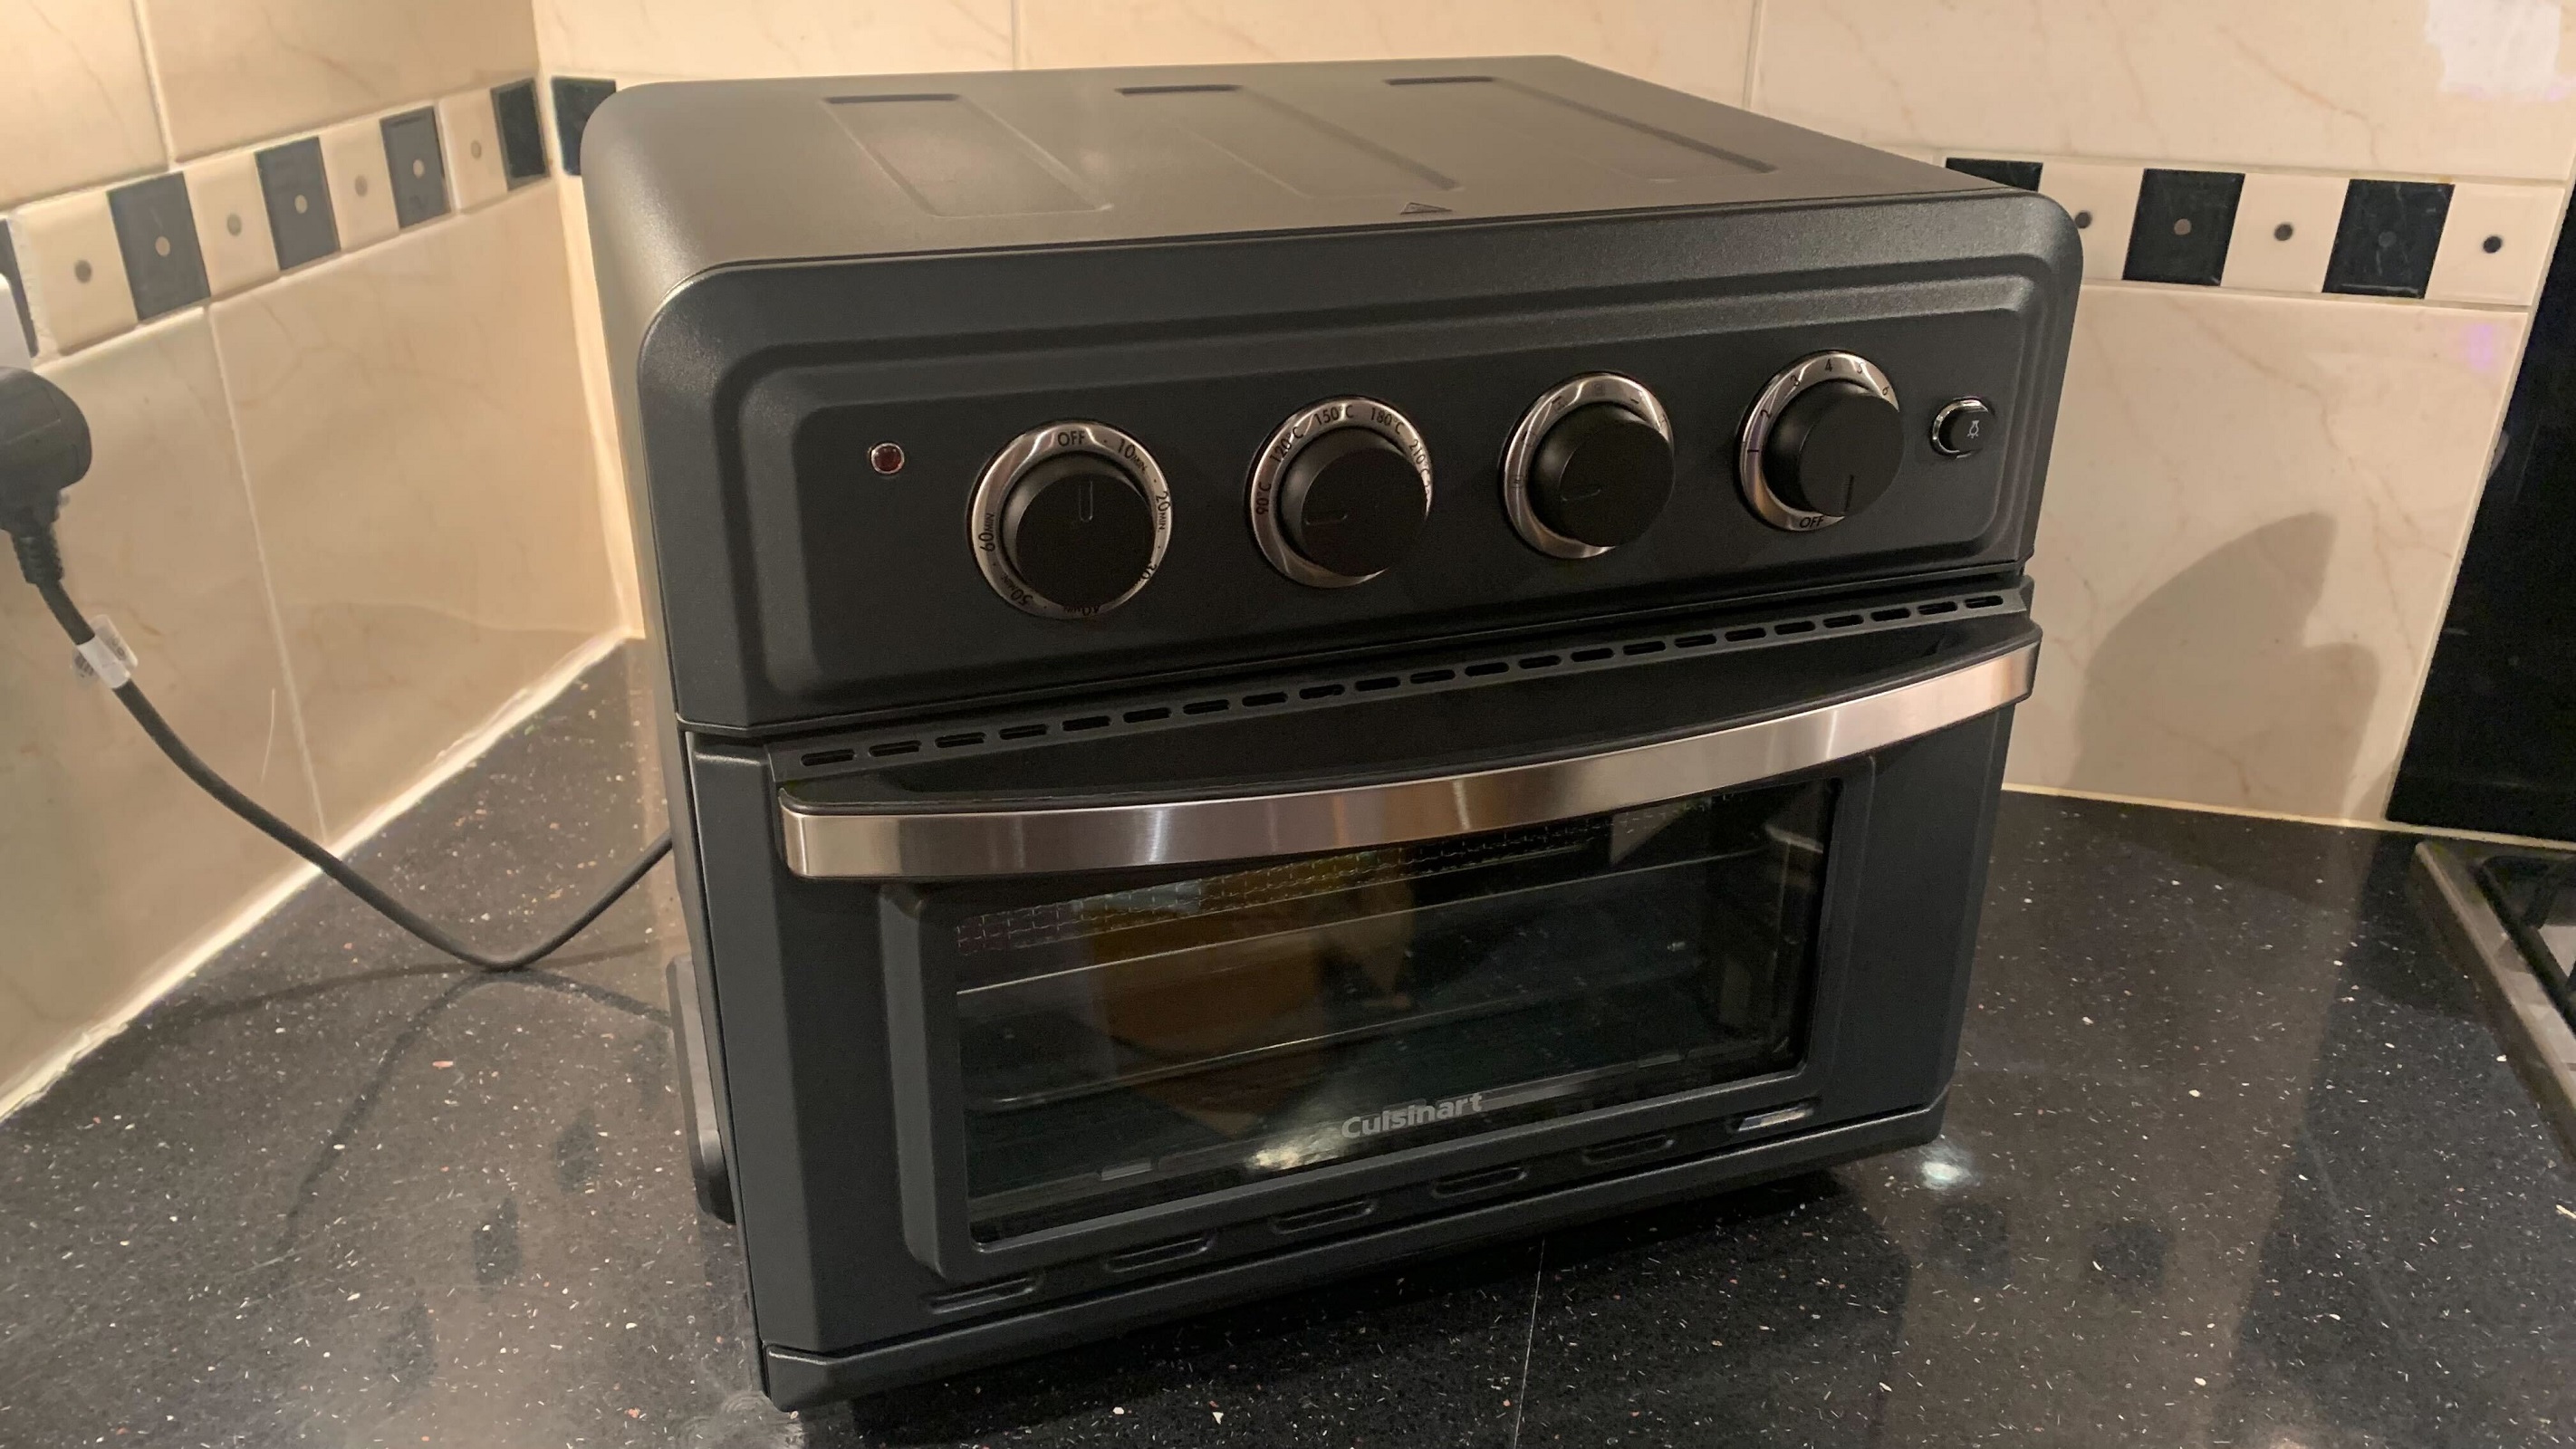 Cuisinart AirFryer Toaster Oven Review: Cook Anything